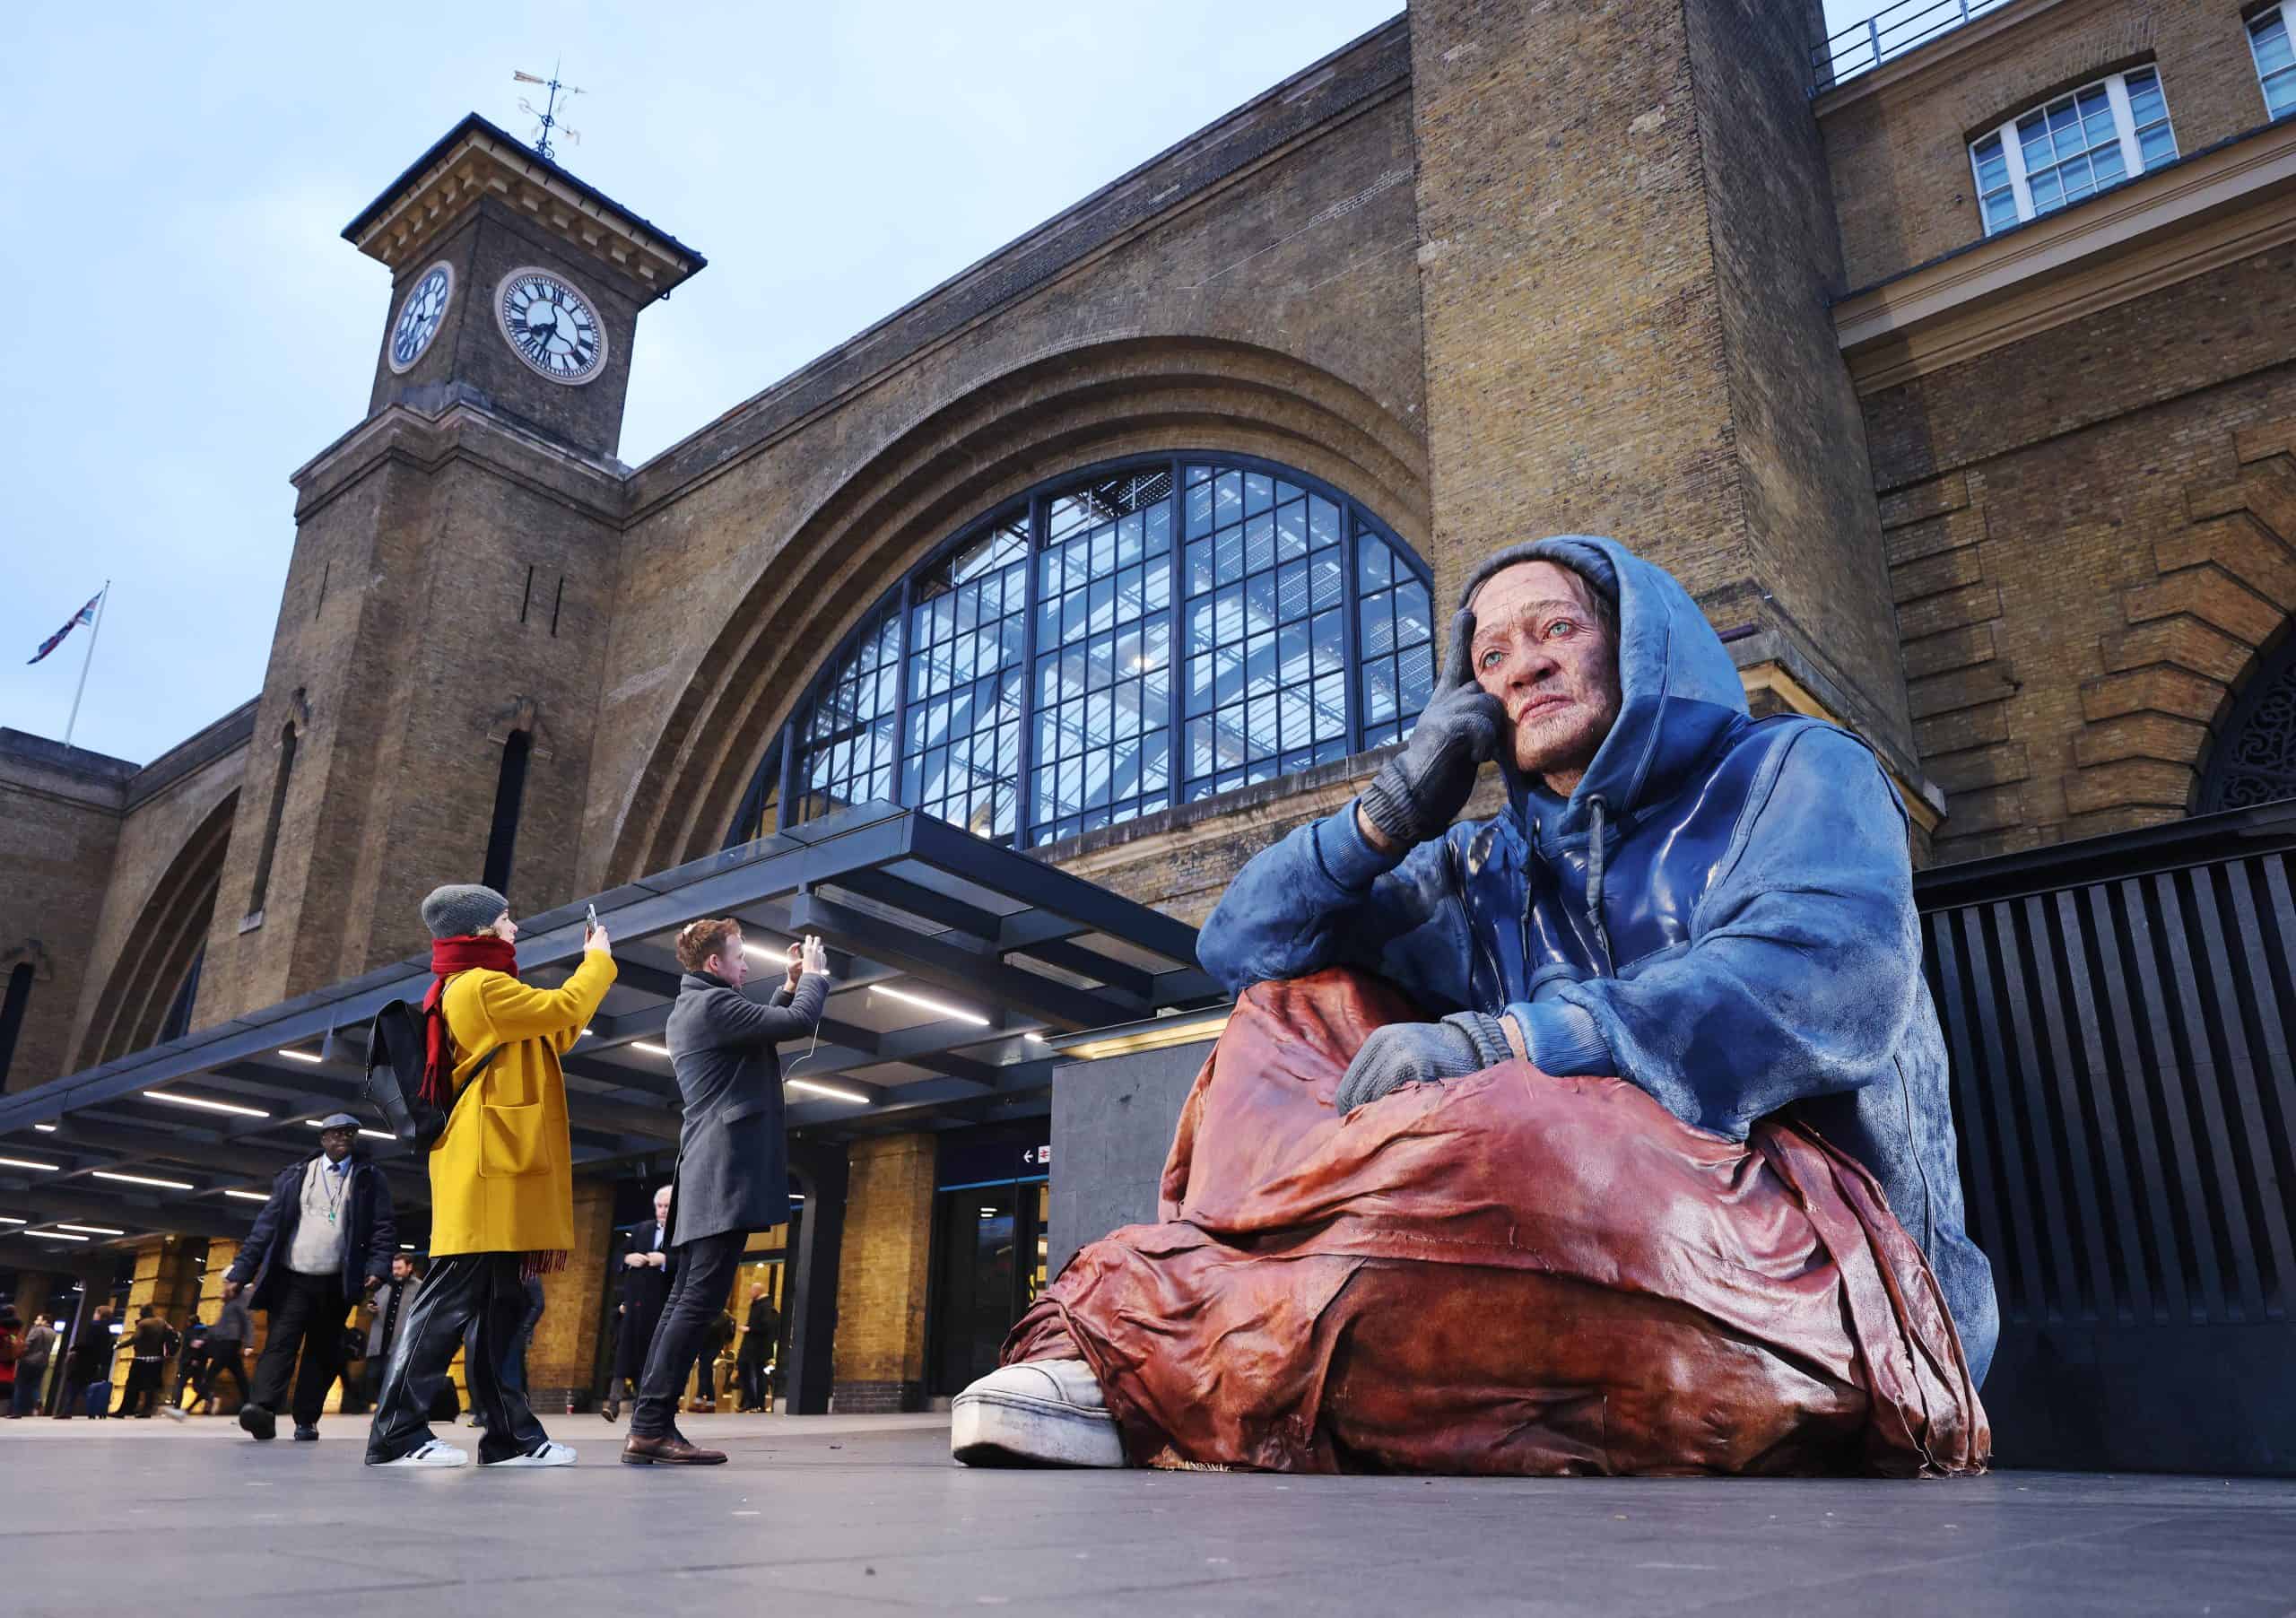 Homeless charity unveils towering King’s Cross sculpture